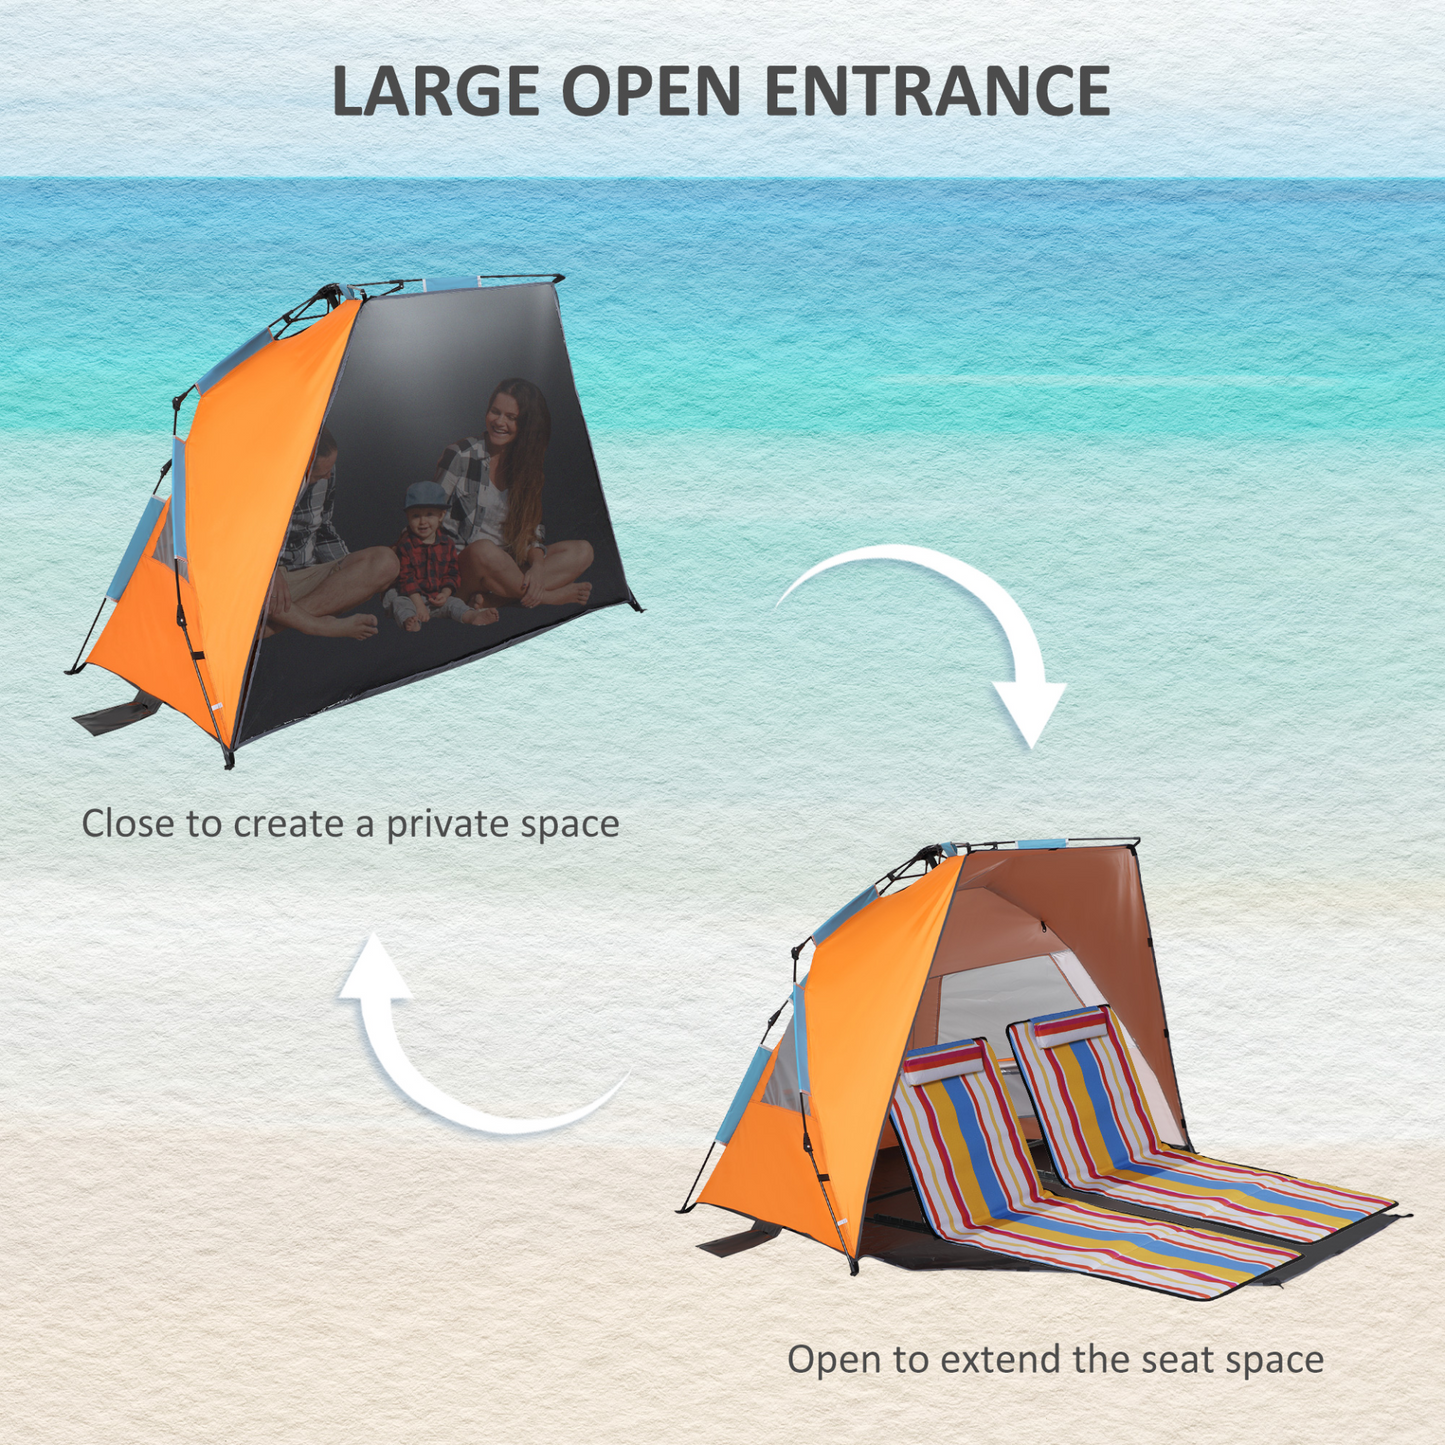 Outsunny 3 Person Pop Up Tent Beach Tent, Easy Set Up Sun Shelter, Portable Instant Beach Shade w/ Extended Porch, Sandbags, Mesh Screen Windows and Carry Bag